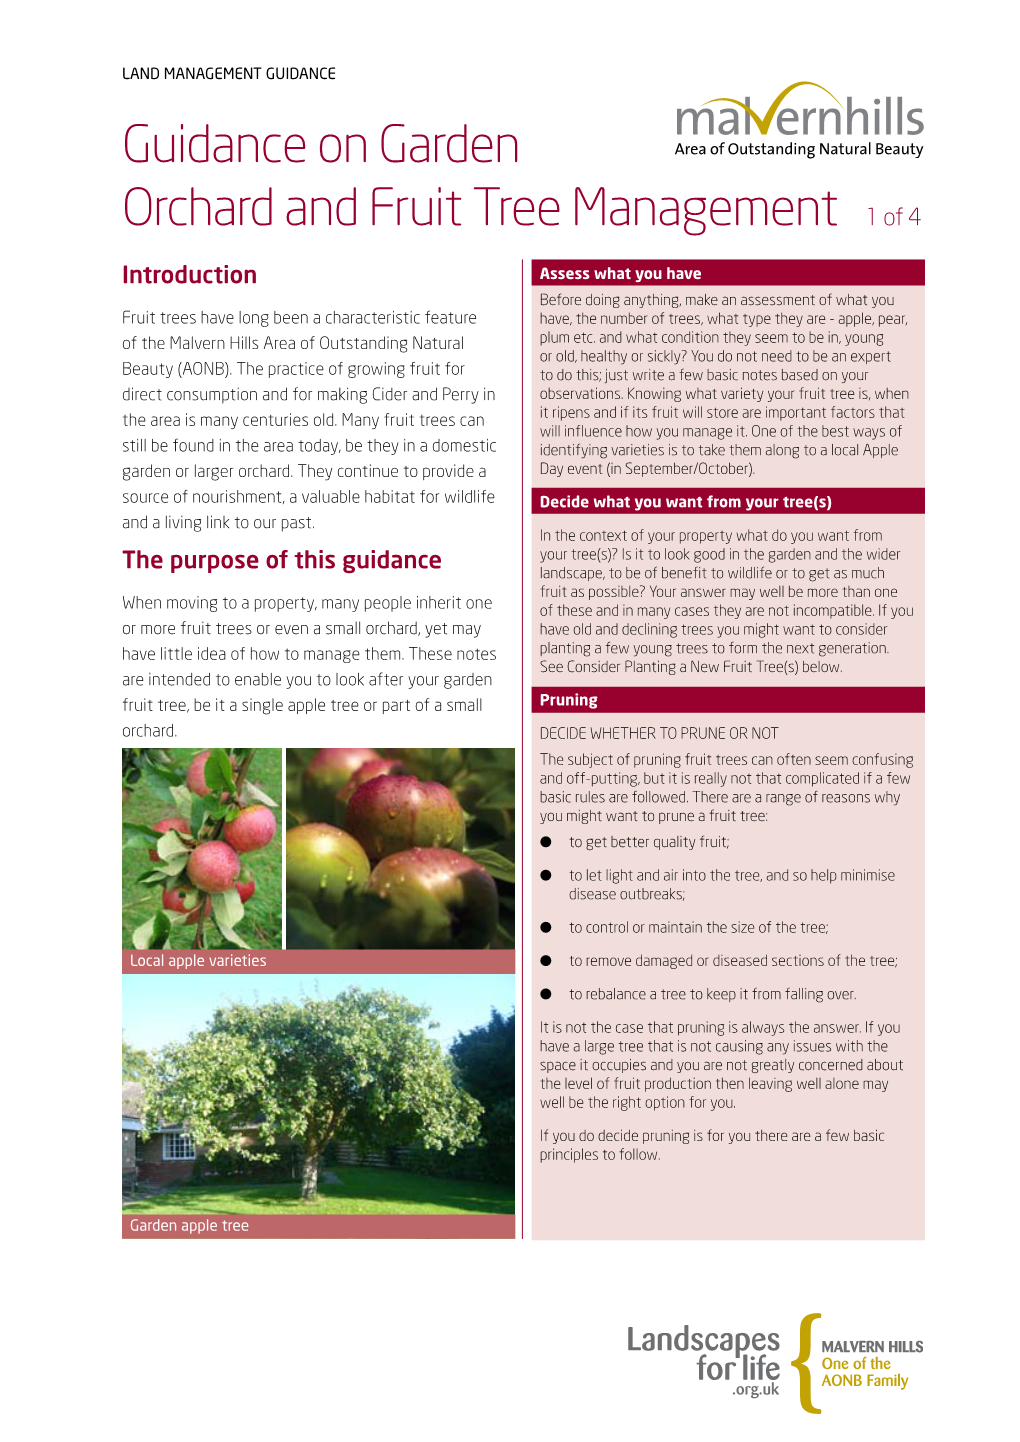 Download the Guidance on Garden Orchard and Fruit Tree Management